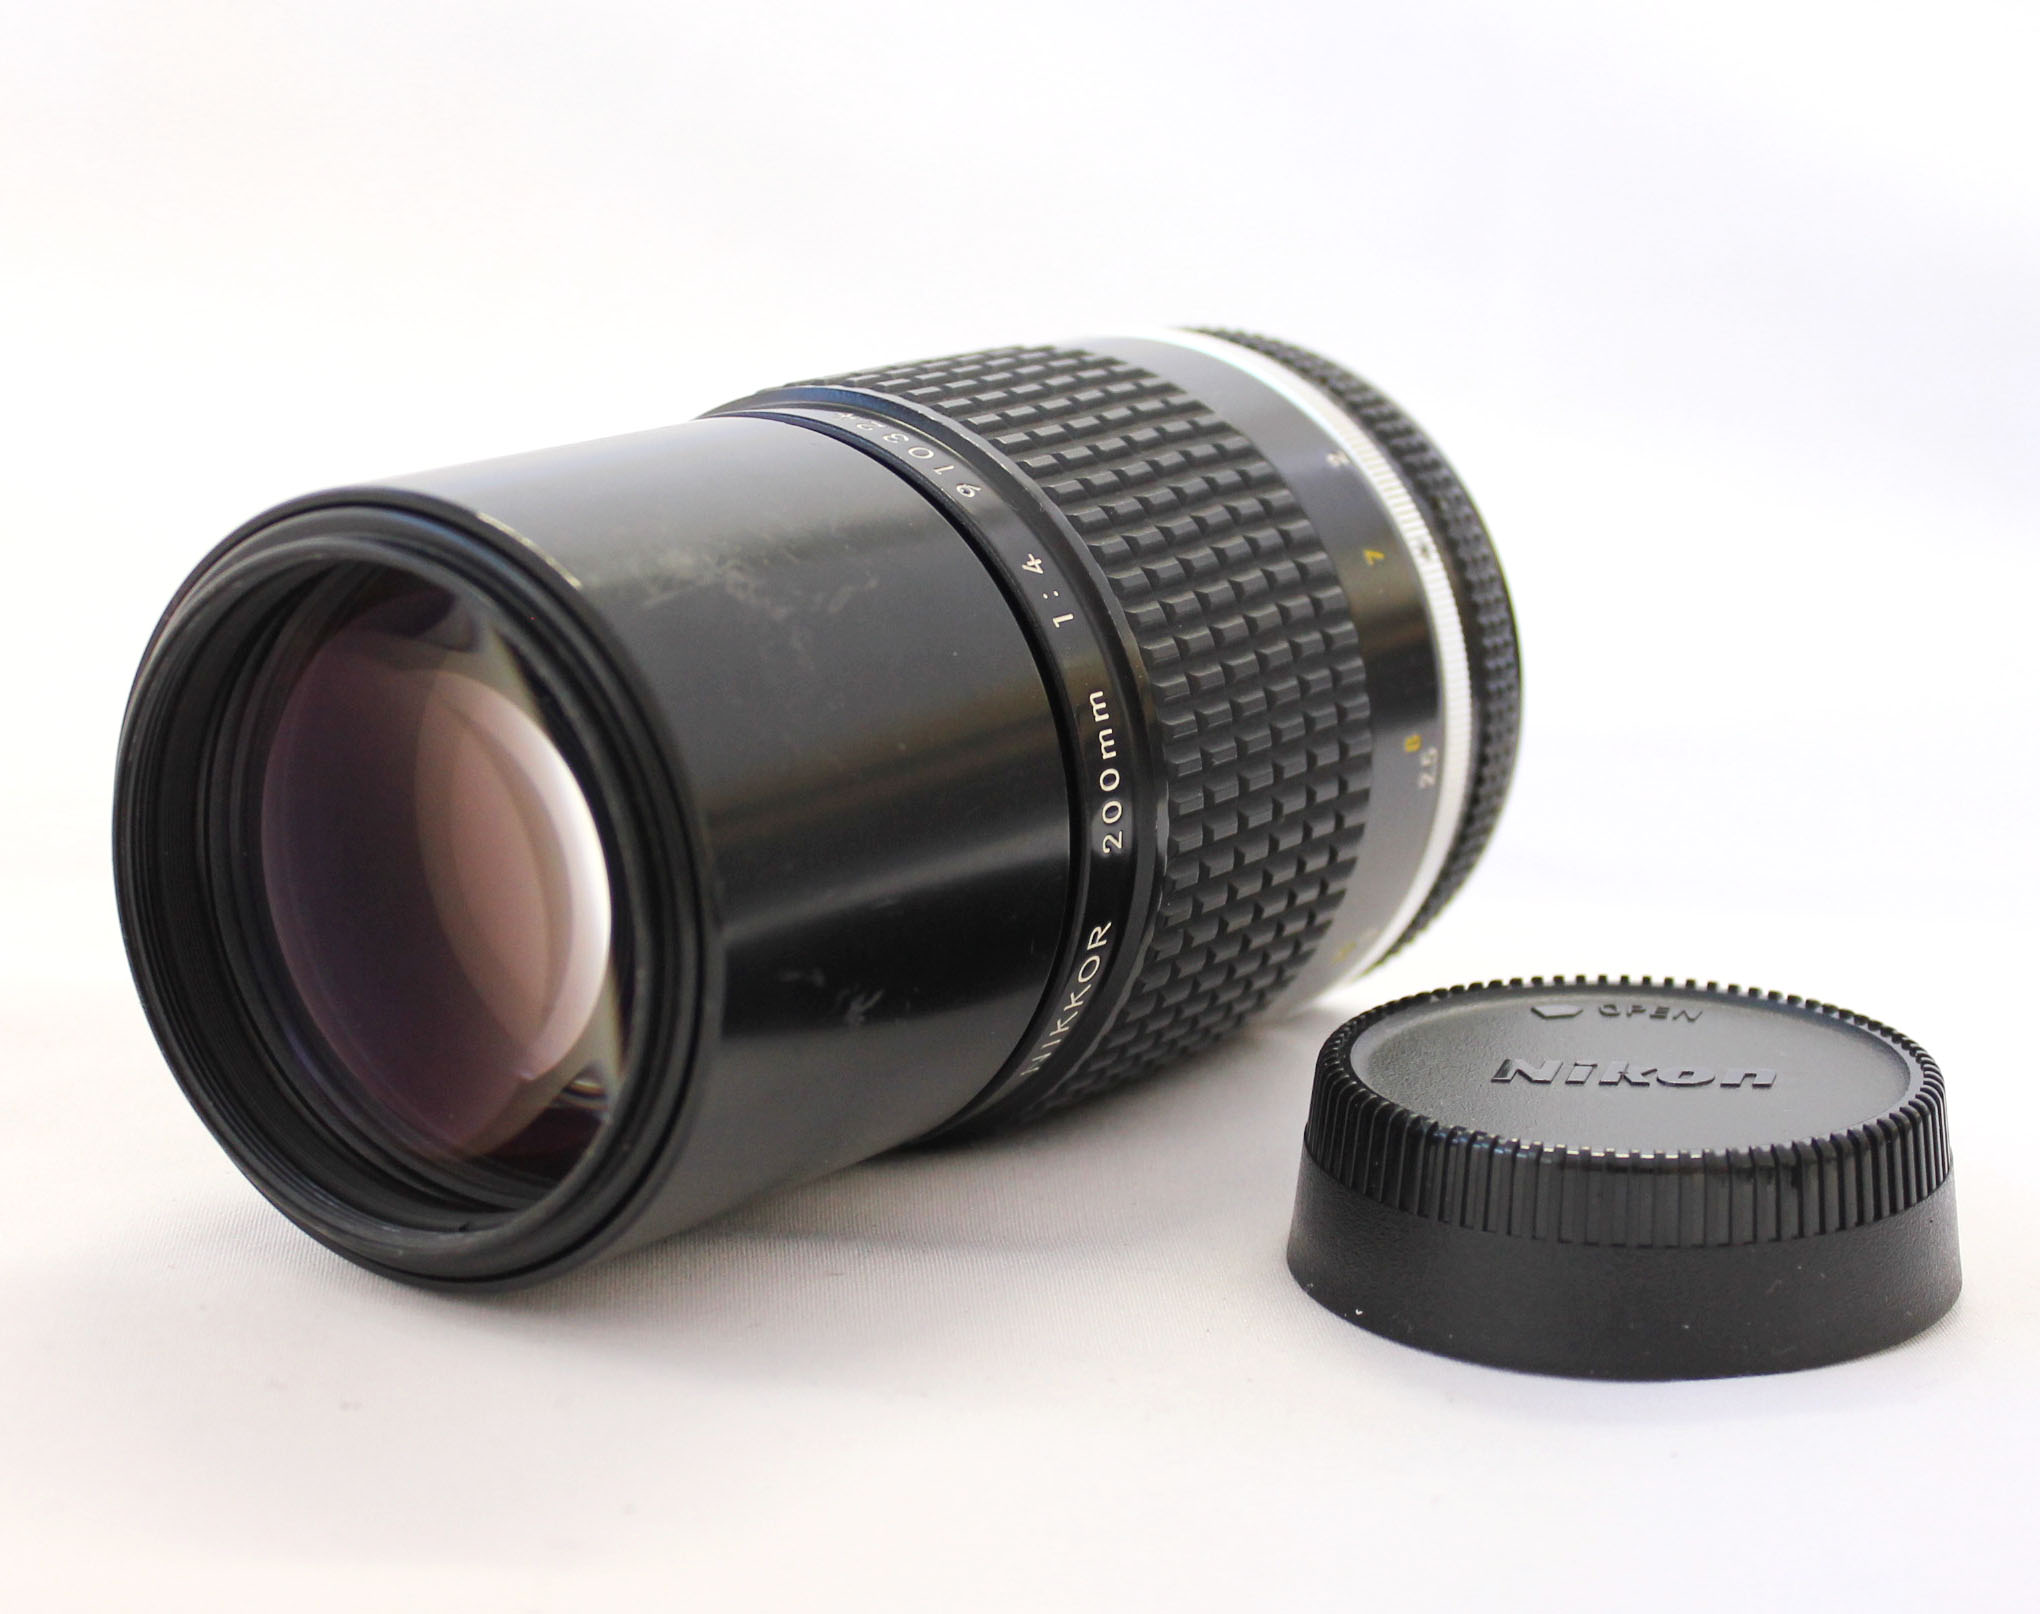 Japan Used Camera Shop | [Excellent+++++] Nikon Ai-s NIKKOR 200mm F/4 MF Telephoto Lens from Japan